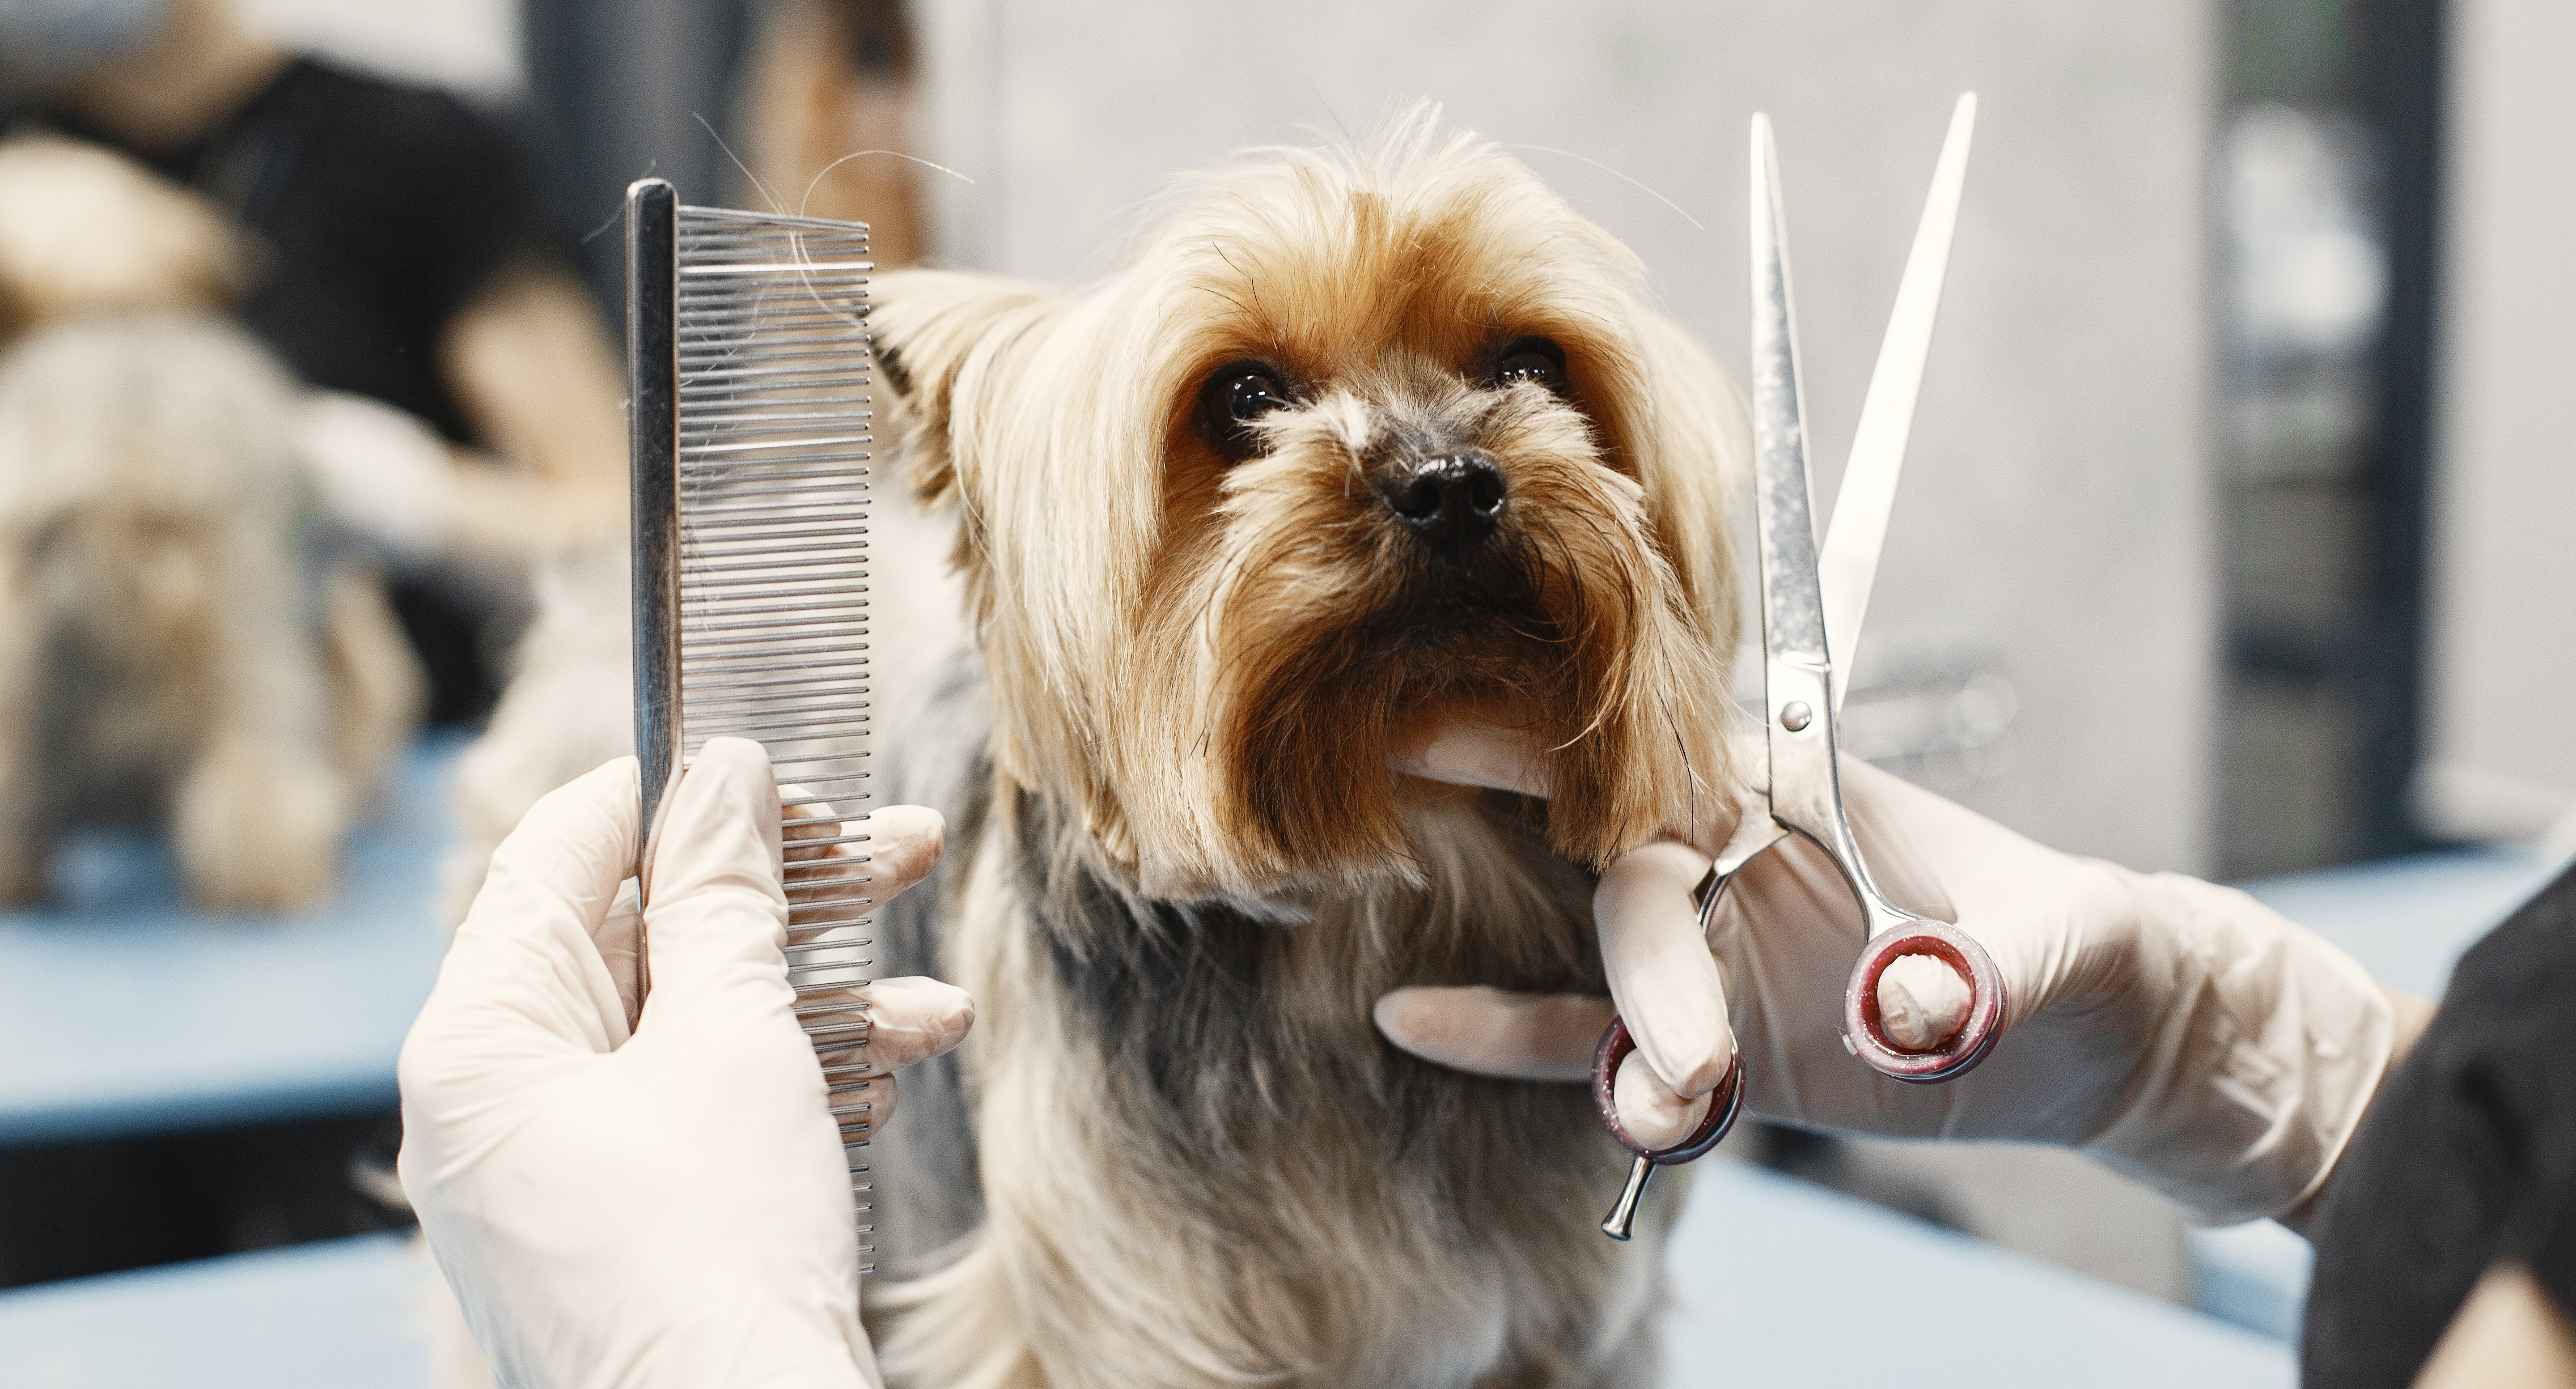 Frequently Asked Questions About Dog Grooming